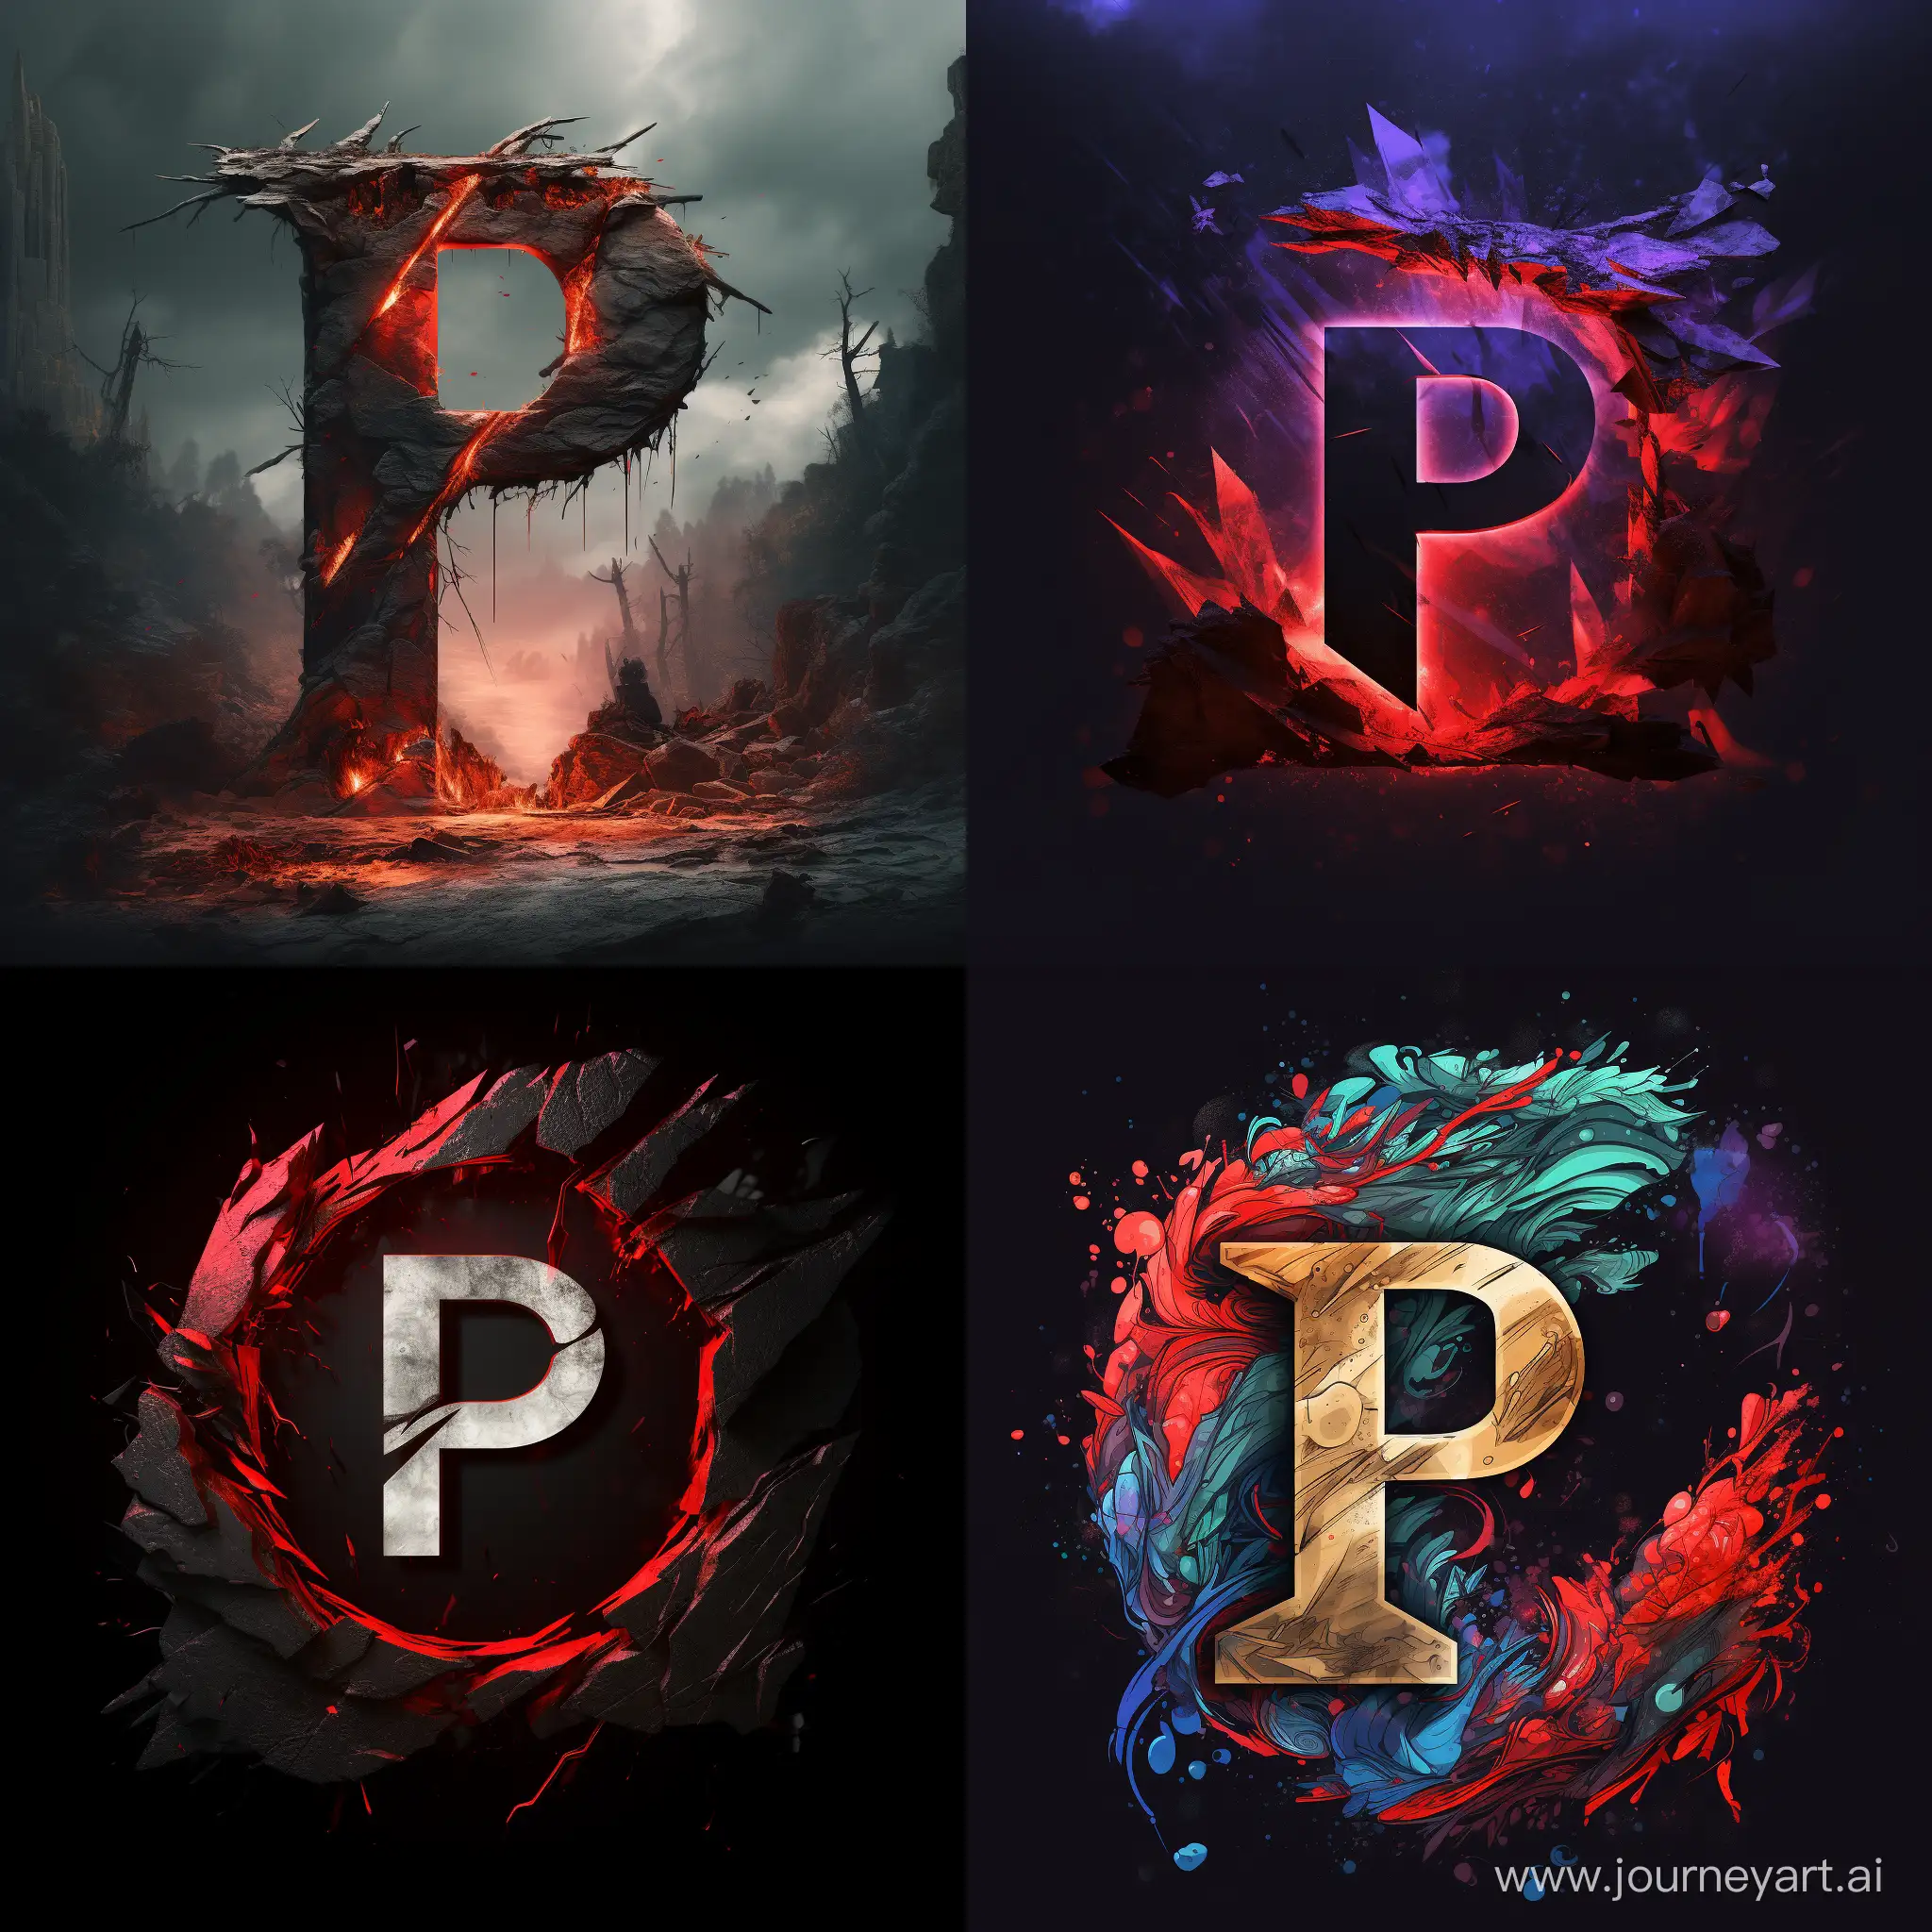 letter P as a logo for a youtube channel describing the prompts 